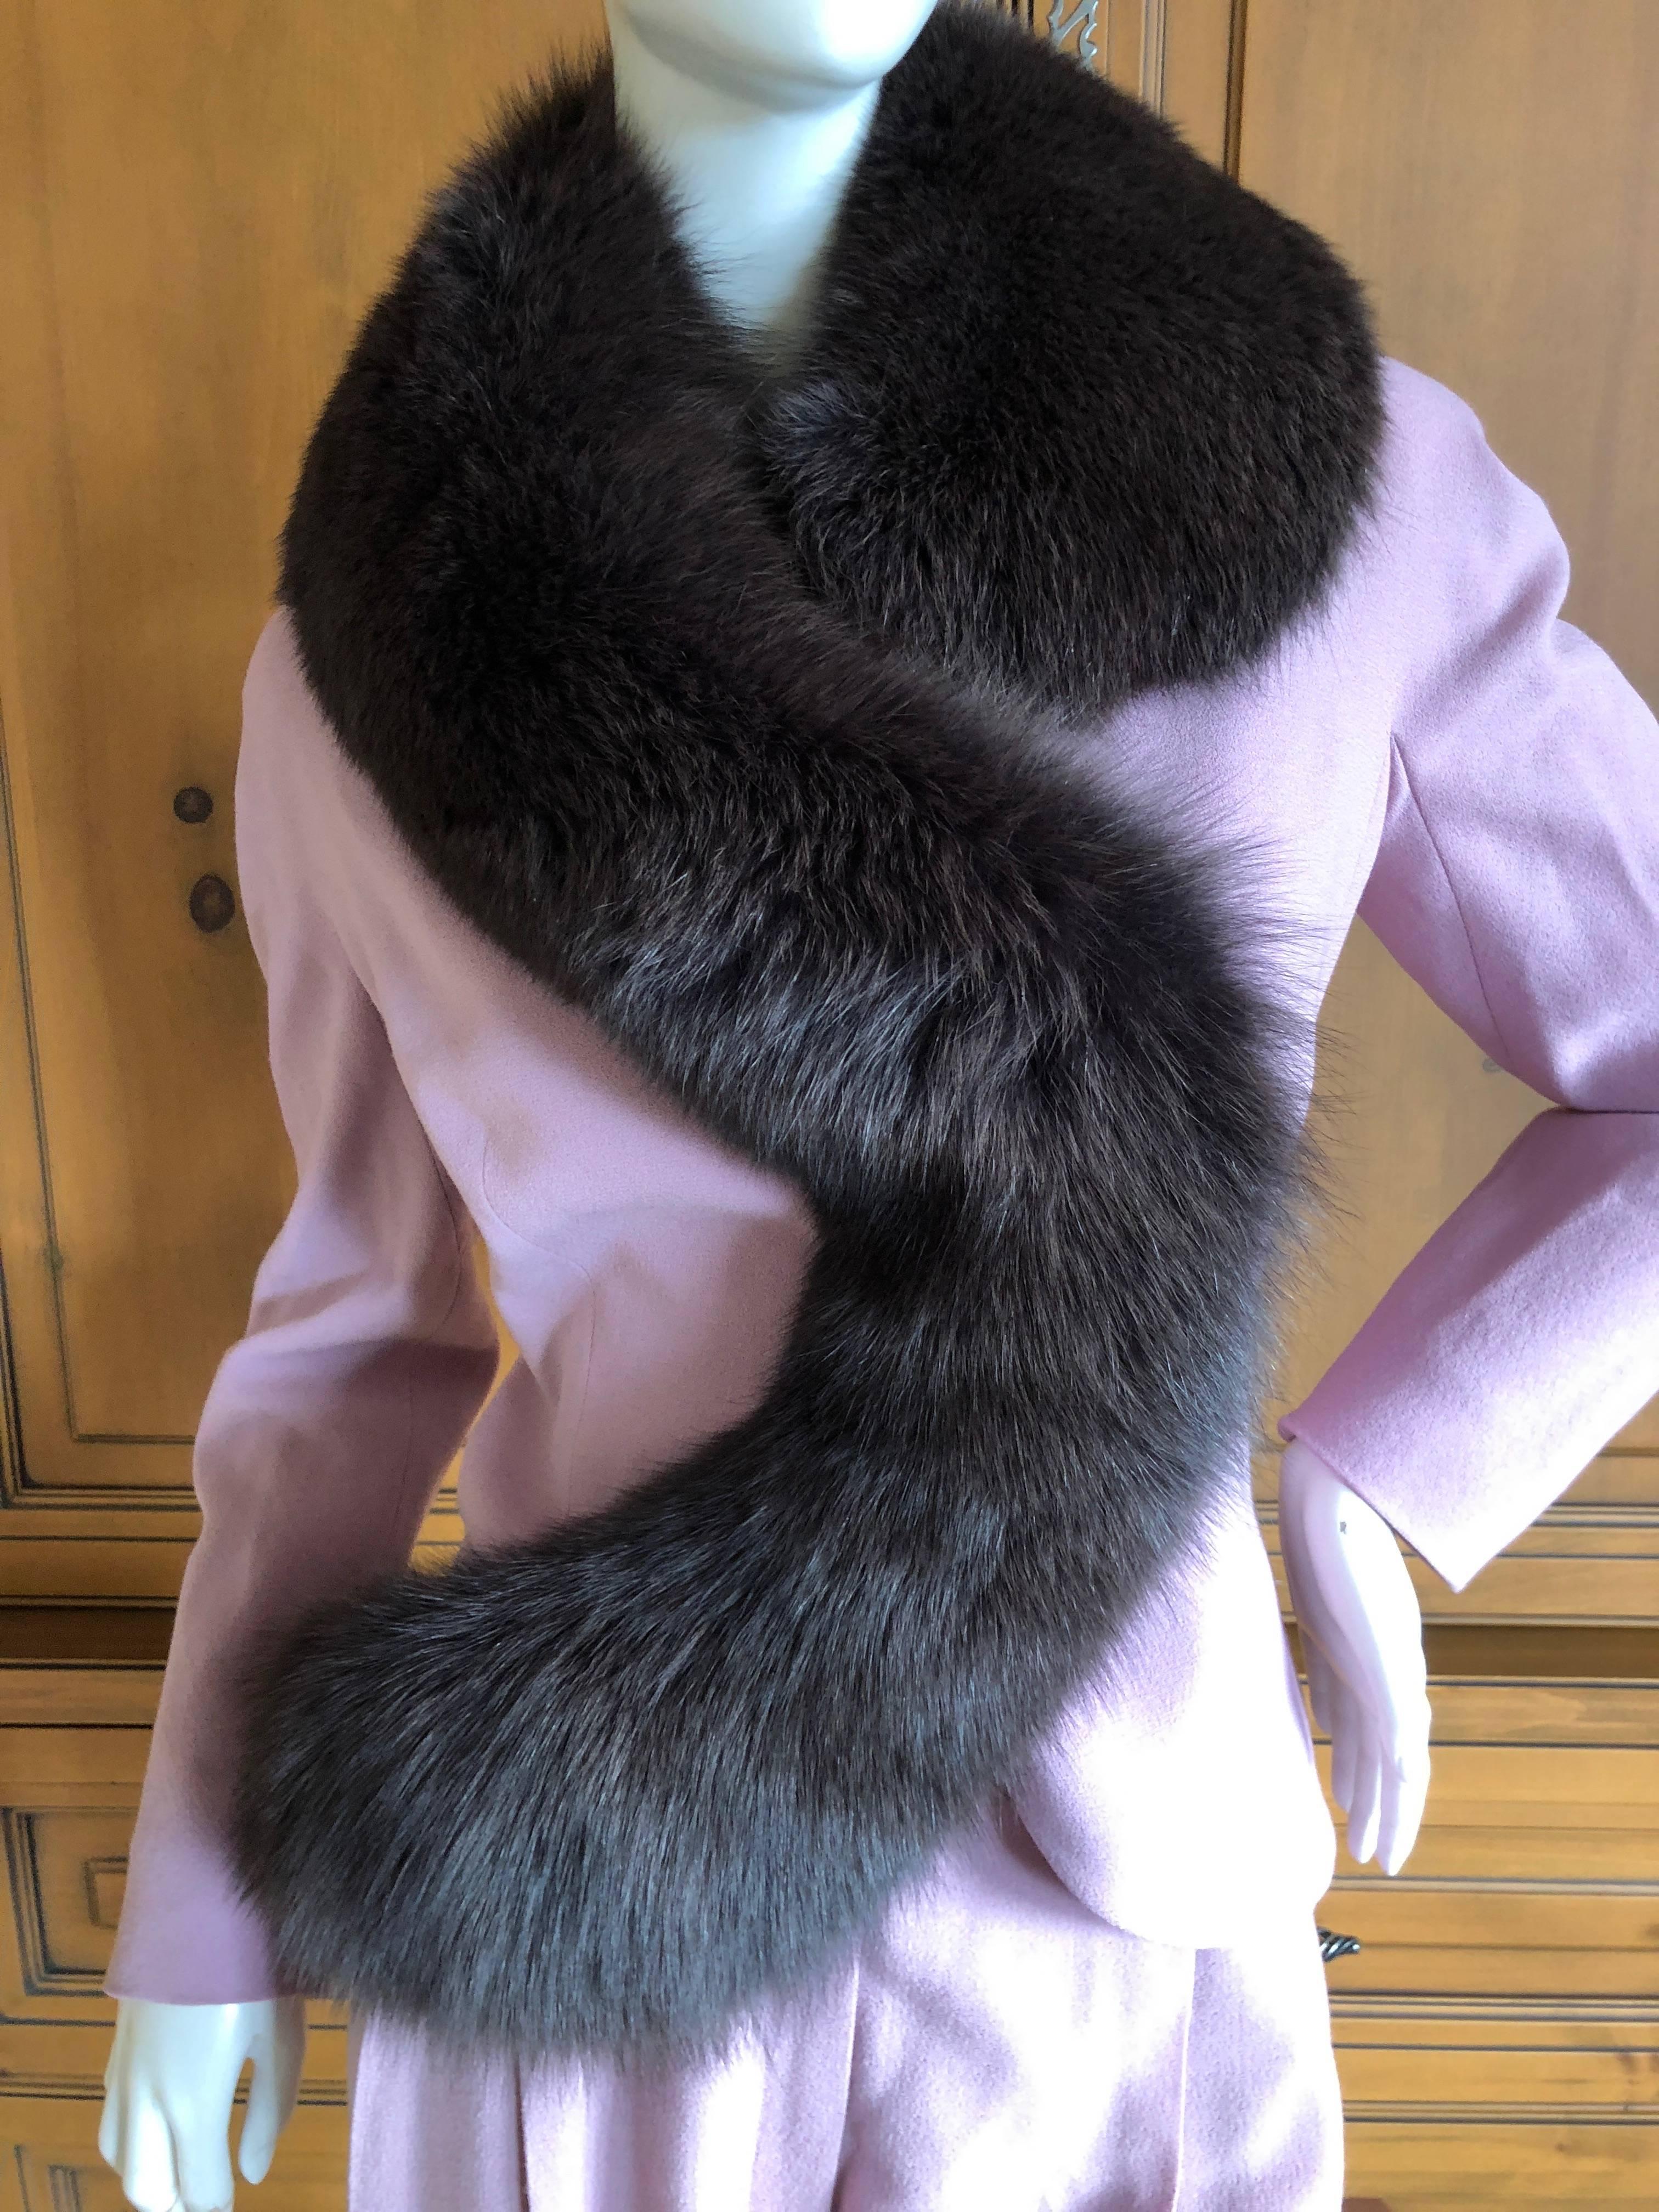  Christian Dior by John Galliano vintage rose wool suit with extravagant fox fur trim

Lined in silk , two side pockets.

Details to follow
 Size 42
Bust 38